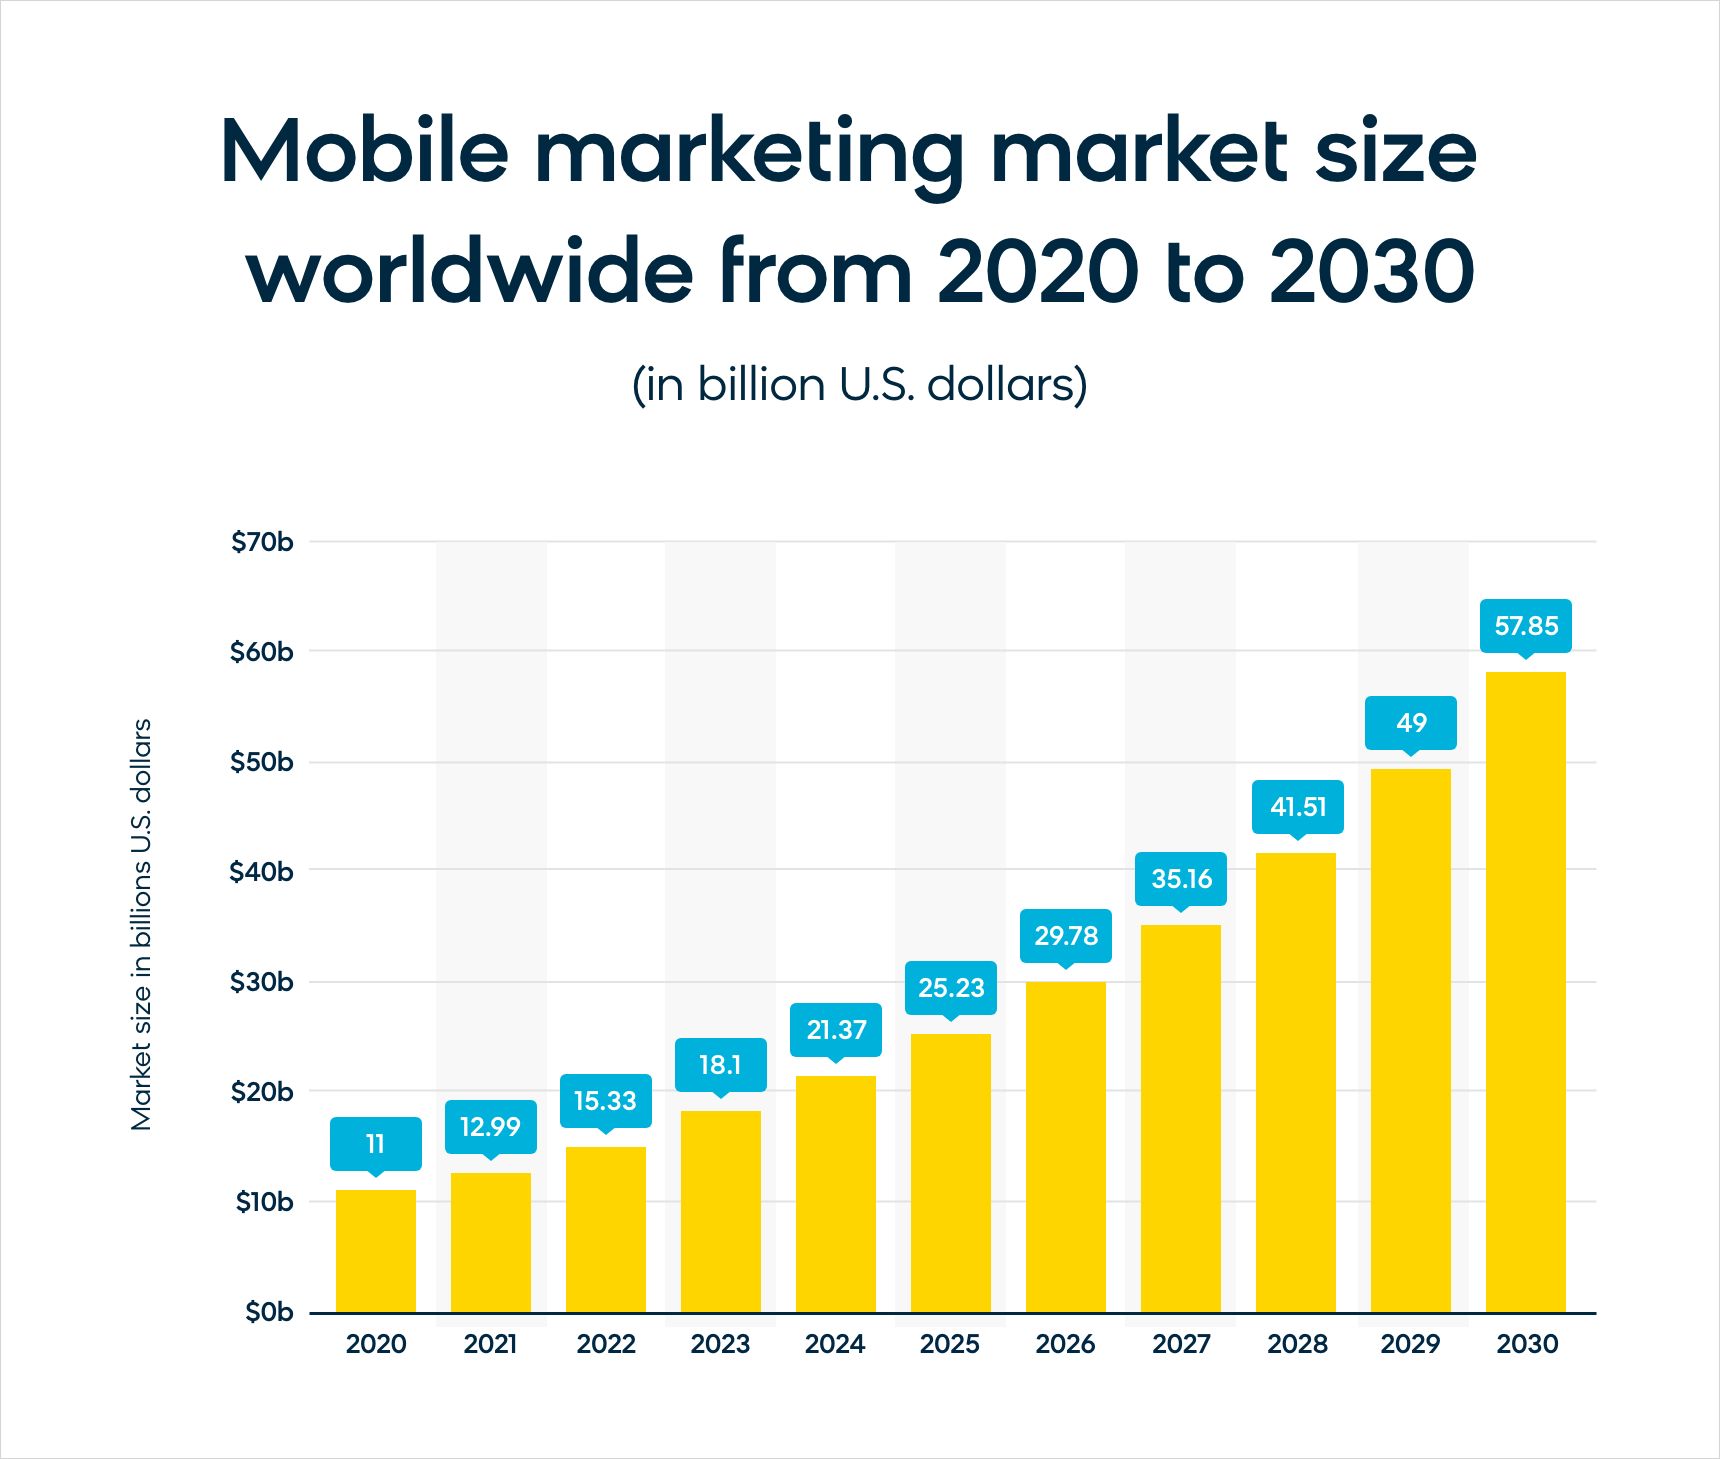 The predicted worldwide mobile marketing size for the next 10 years